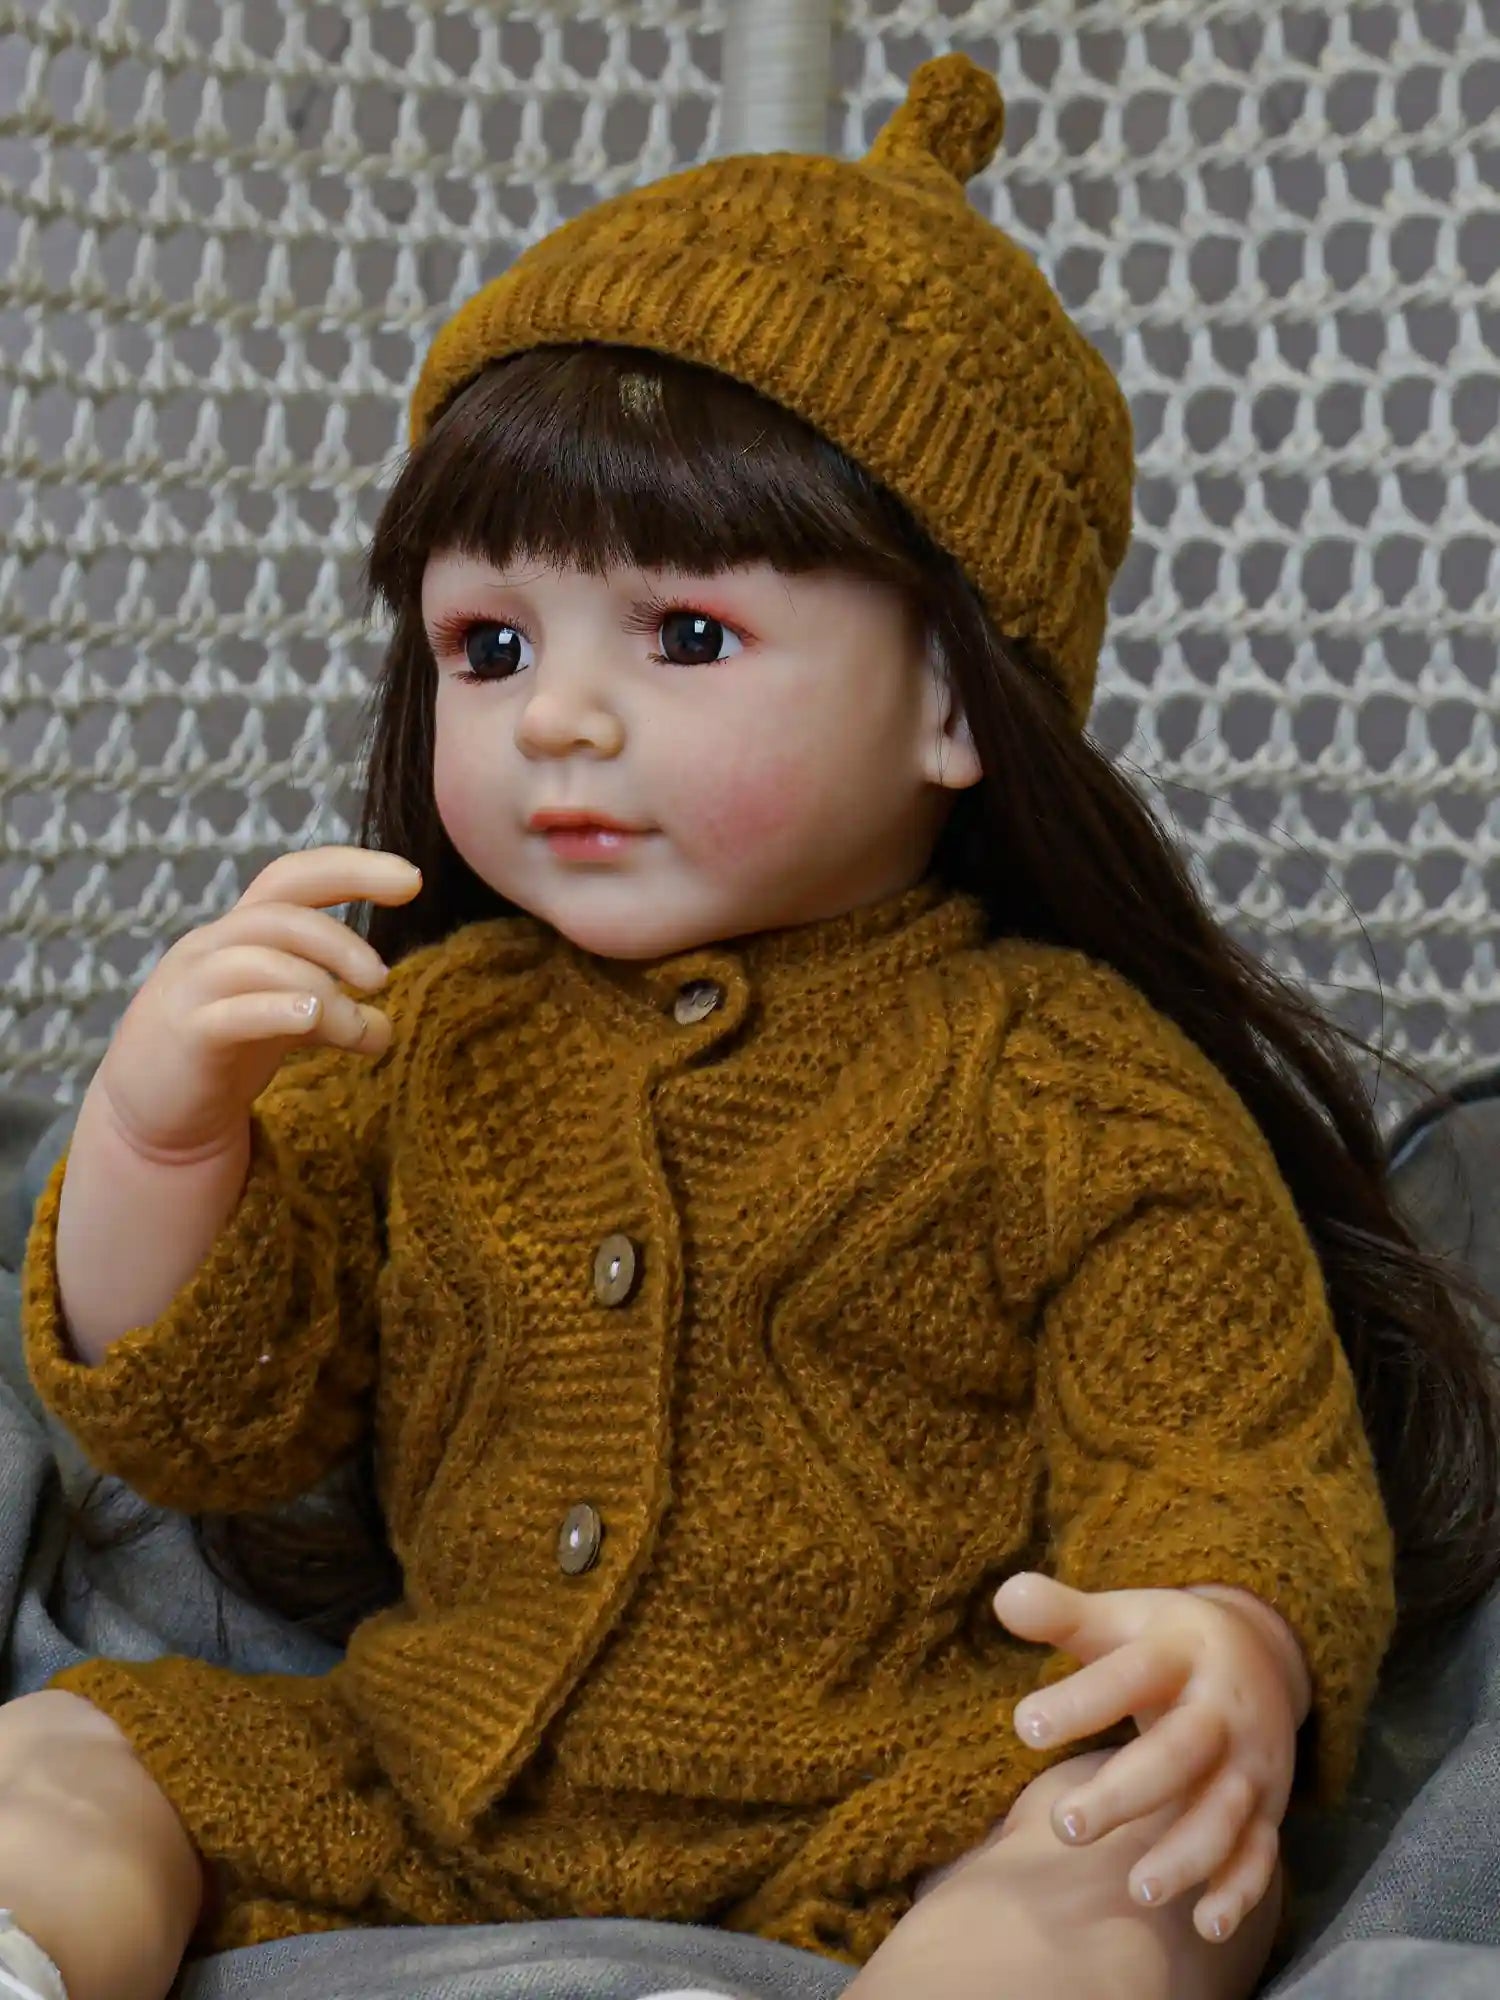 Collectible doll with a serene expression, featuring long brown hair and wearing seasonal mustard knitwear, positioned cozily with white shoes on a gray cushion.